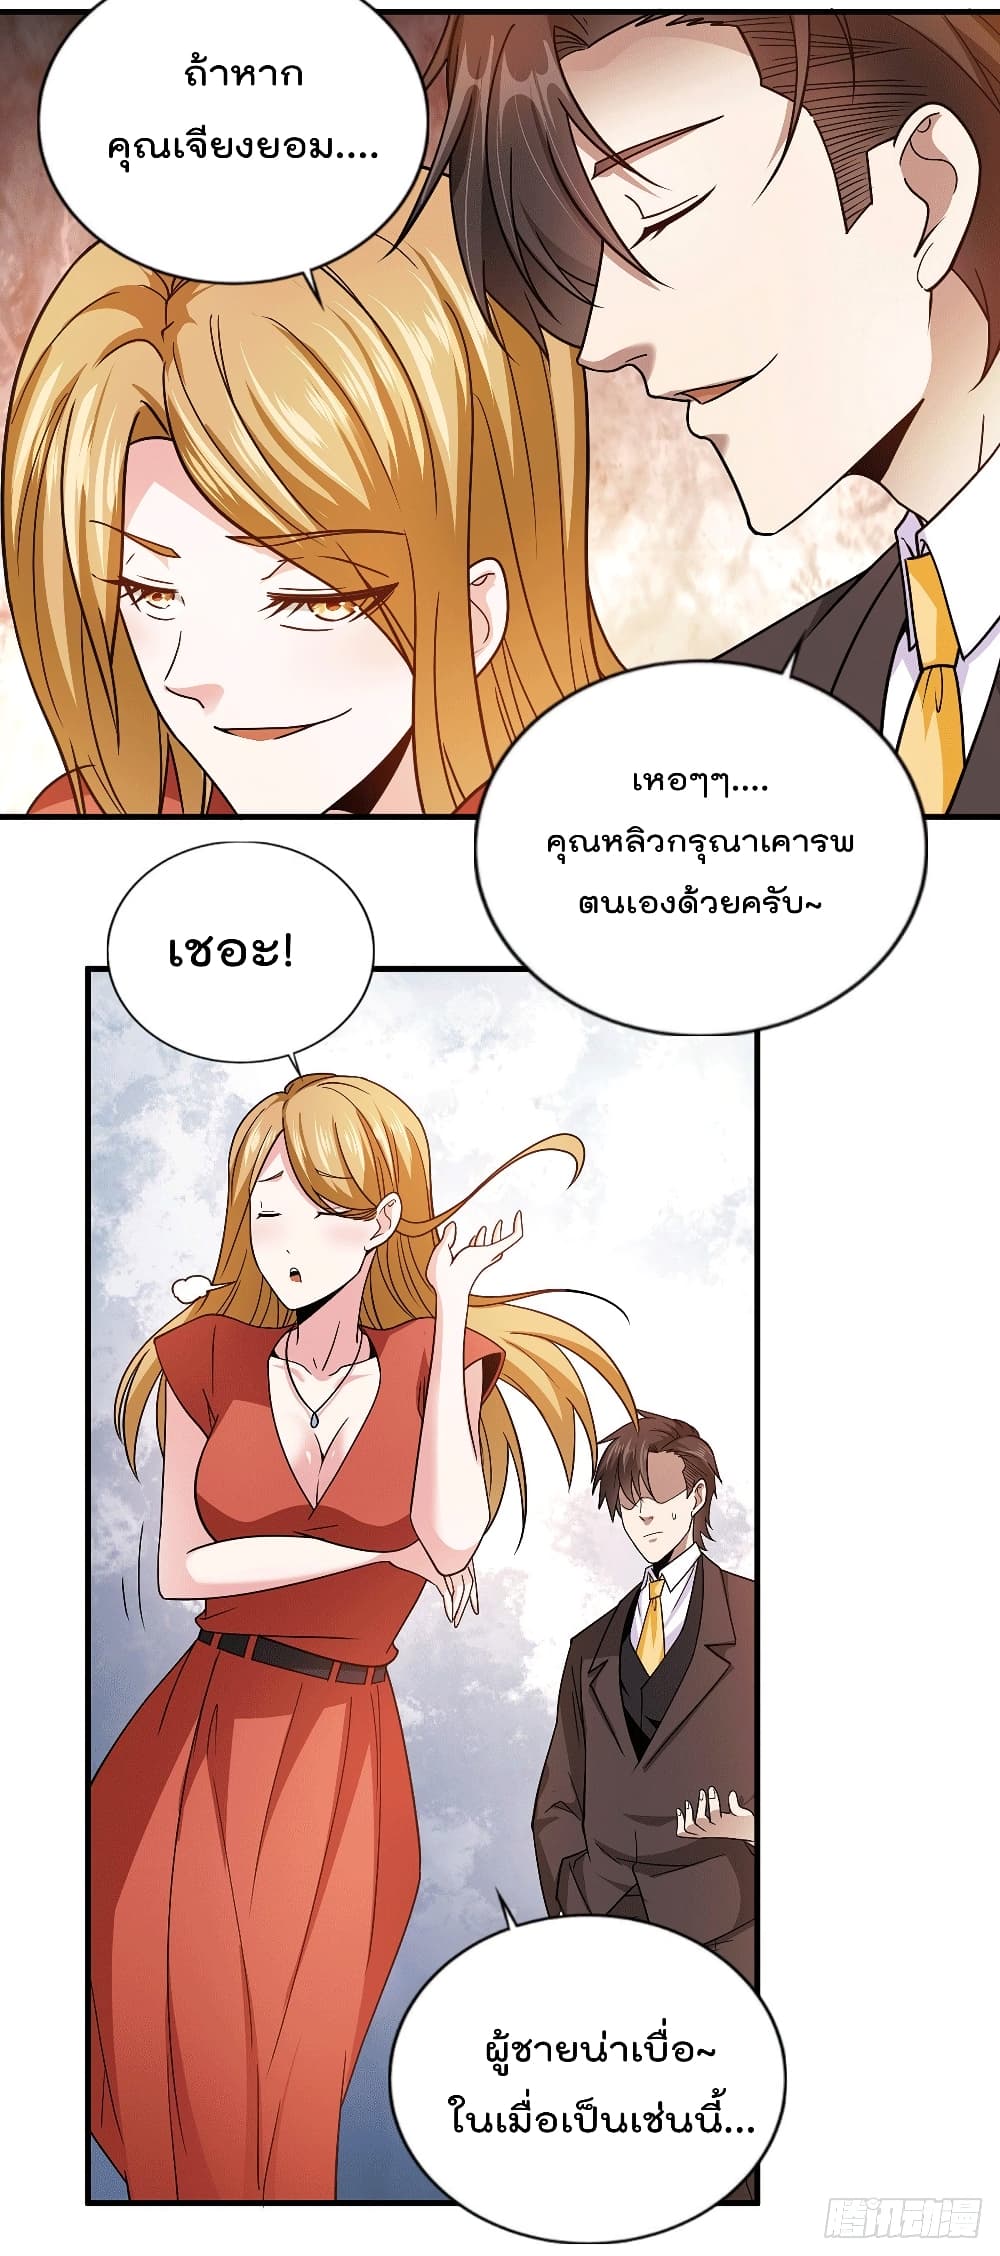 God Dragon of War in The City 44 (27)